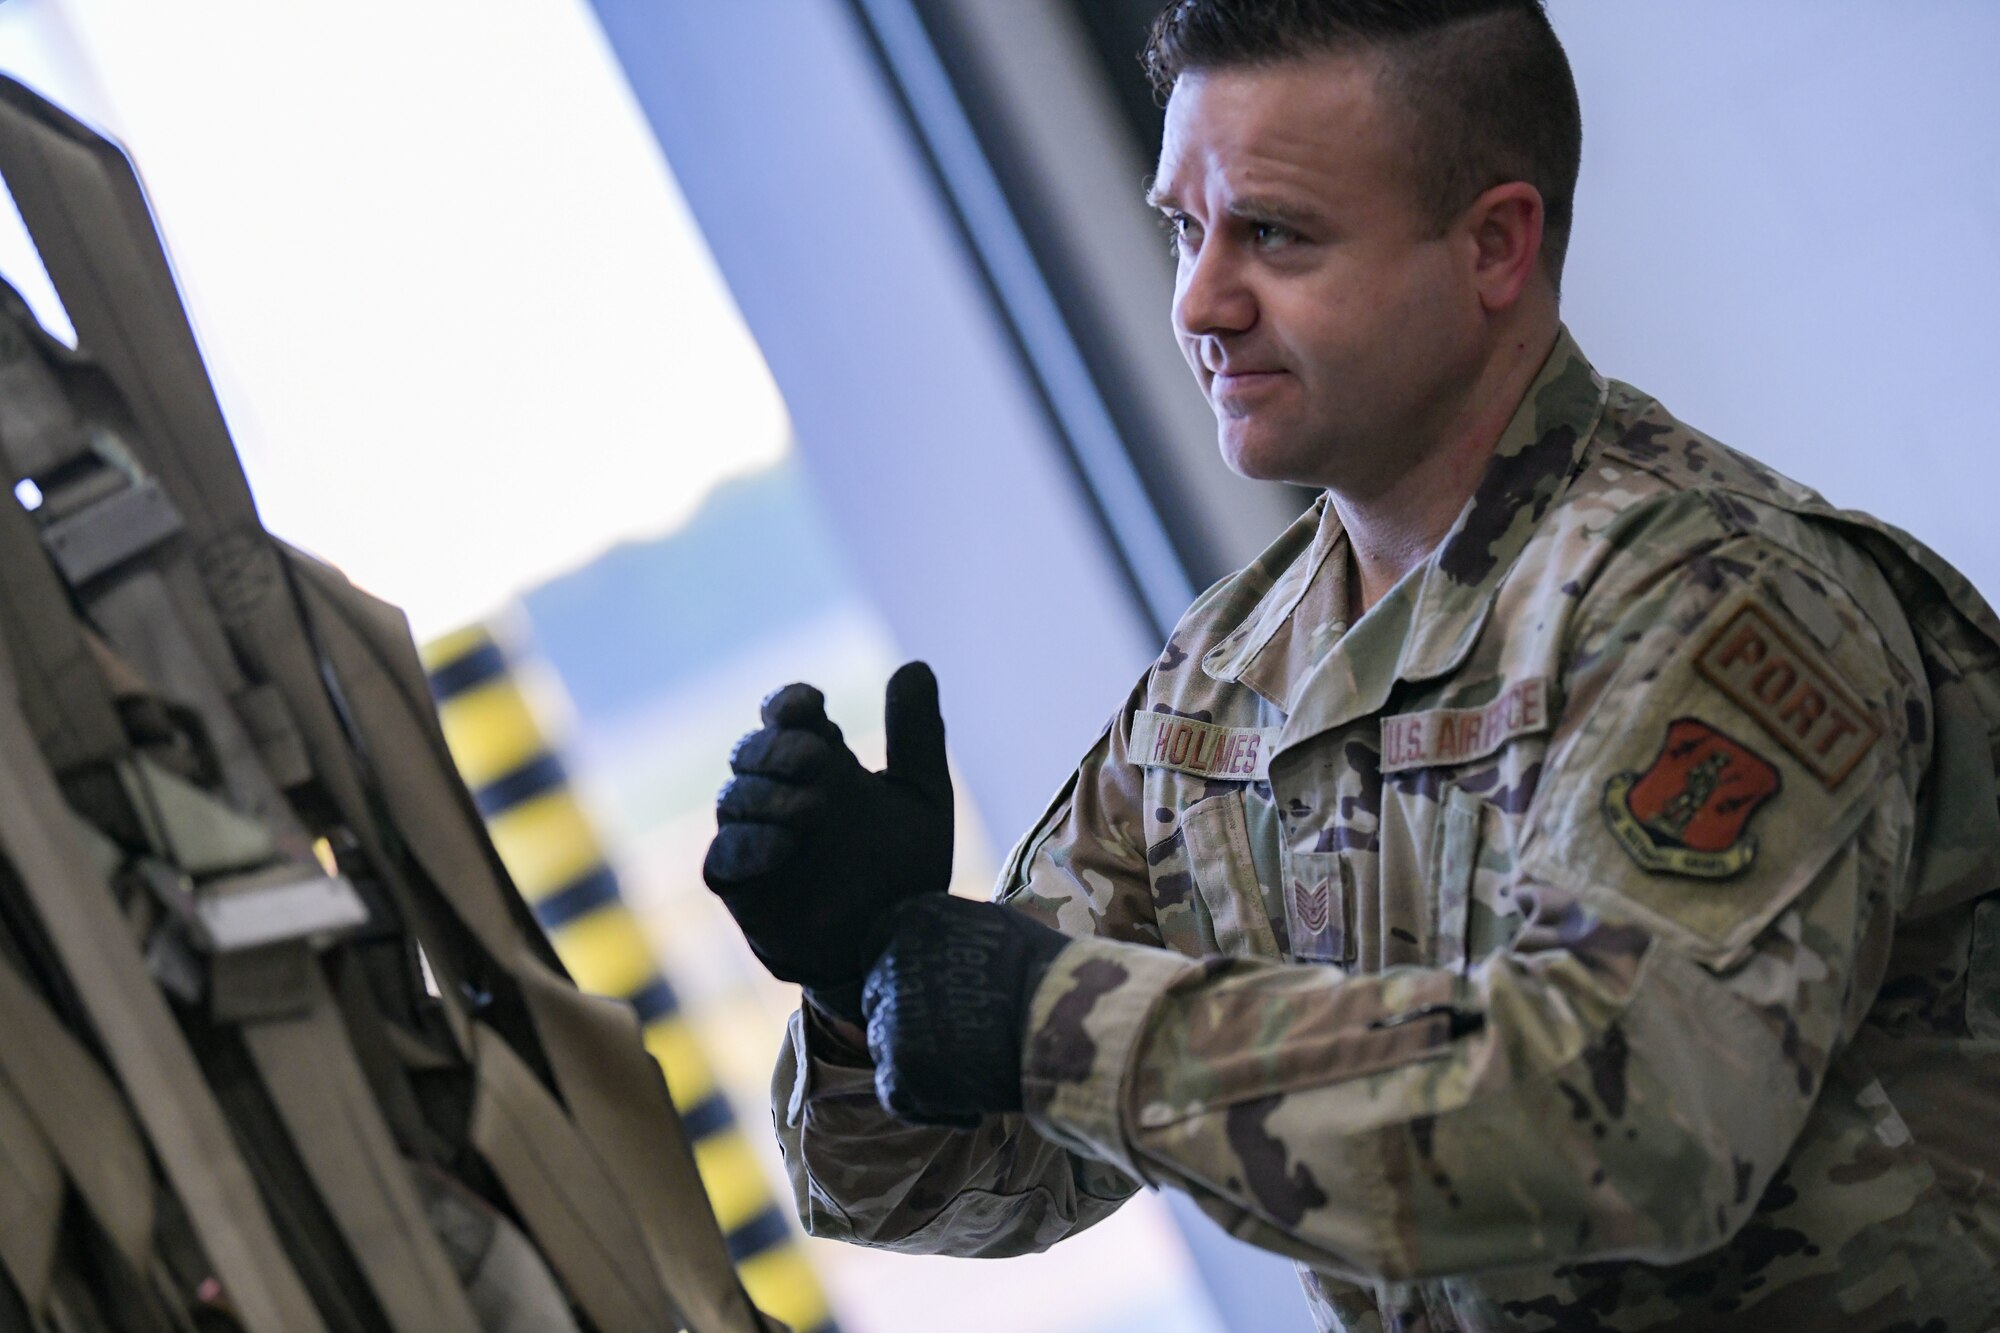 Tech. Sgt. Adam Holmes, an air transportation specialist with the 172nd Logistic Readiness Squadron, prepares to inspect webbing used to transport equipment aboard a C-17 Globemaster III. Holmes, a volunteer firefighter known for his leadership and selfless service, recently applied his skillset and servant mentality to assist a stranded driver when no one else would. (U.S. Air National Guard photo by Staff Sgt. Jared Bounds.)